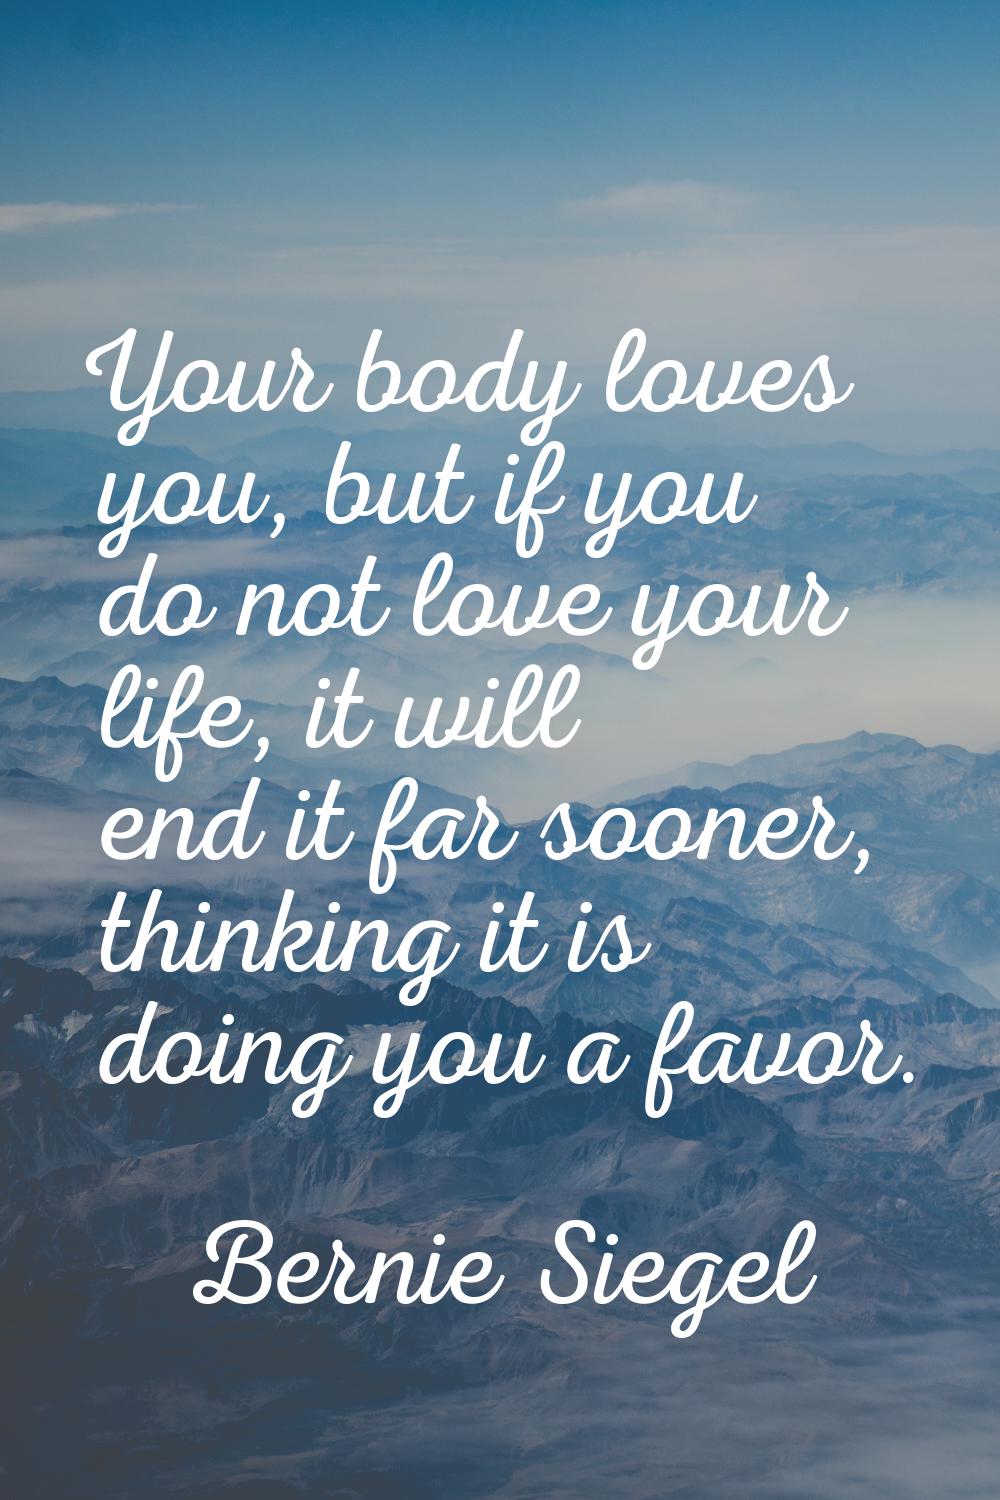 Your body loves you, but if you do not love your life, it will end it far sooner, thinking it is do